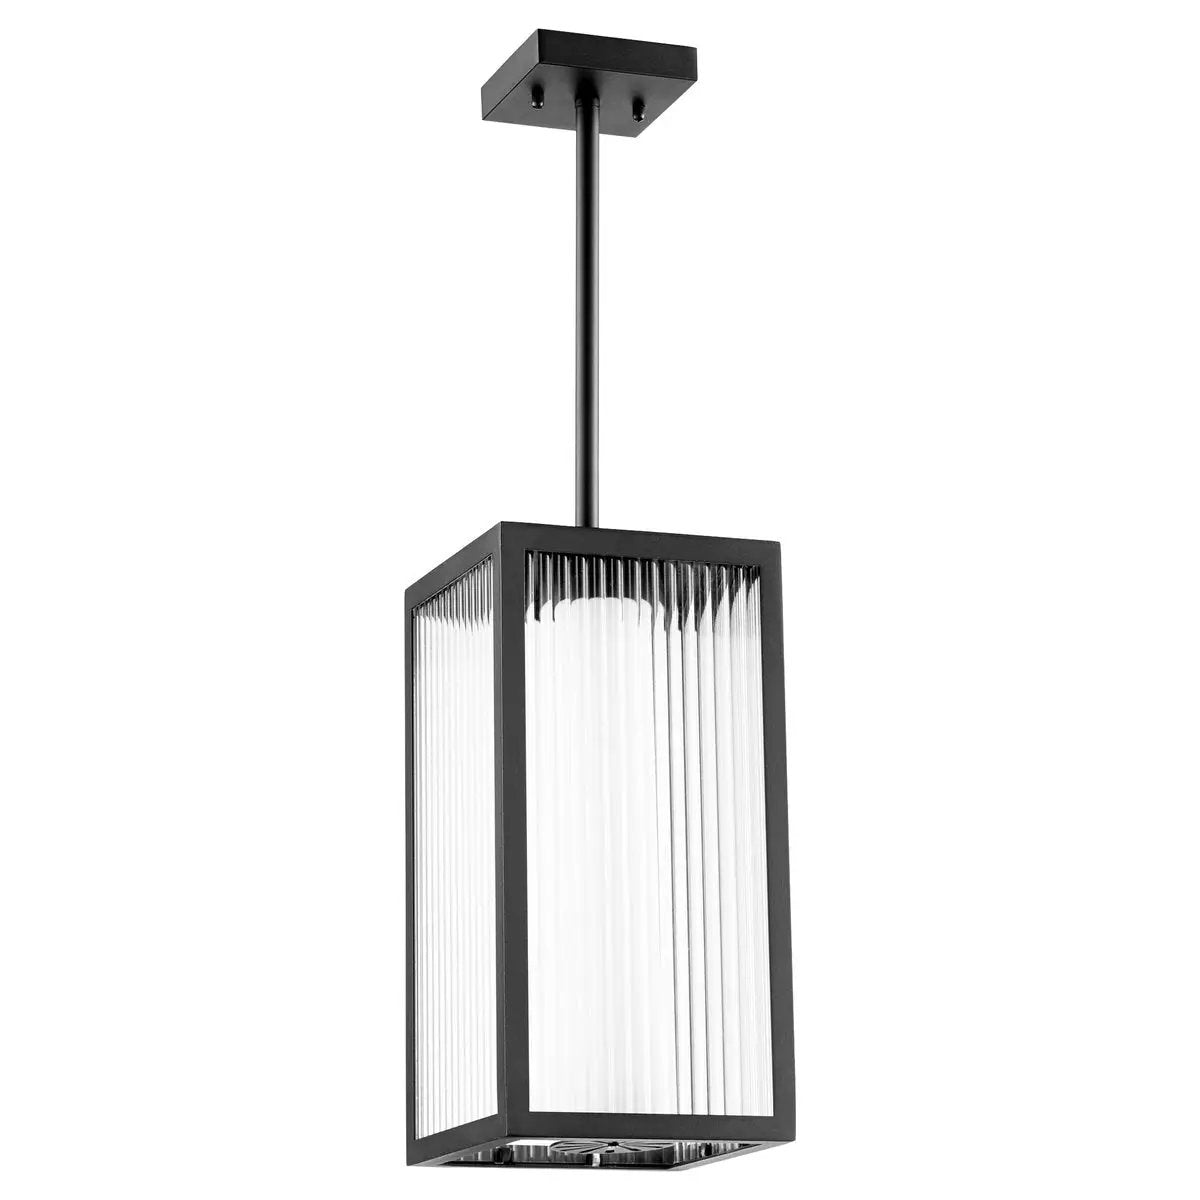 Outdoor Modern Pendant Light with sleek design, boxed shape, and frosted shade inside clear fluted glass exterior. 3 dimmable LED light sources. Perfect for covered patio. Quorum International, 12W, 120V, 3000K, CRI 90, UL Listed, Wet Location, 7.25"W x 17.13"H, 2-year warranty.